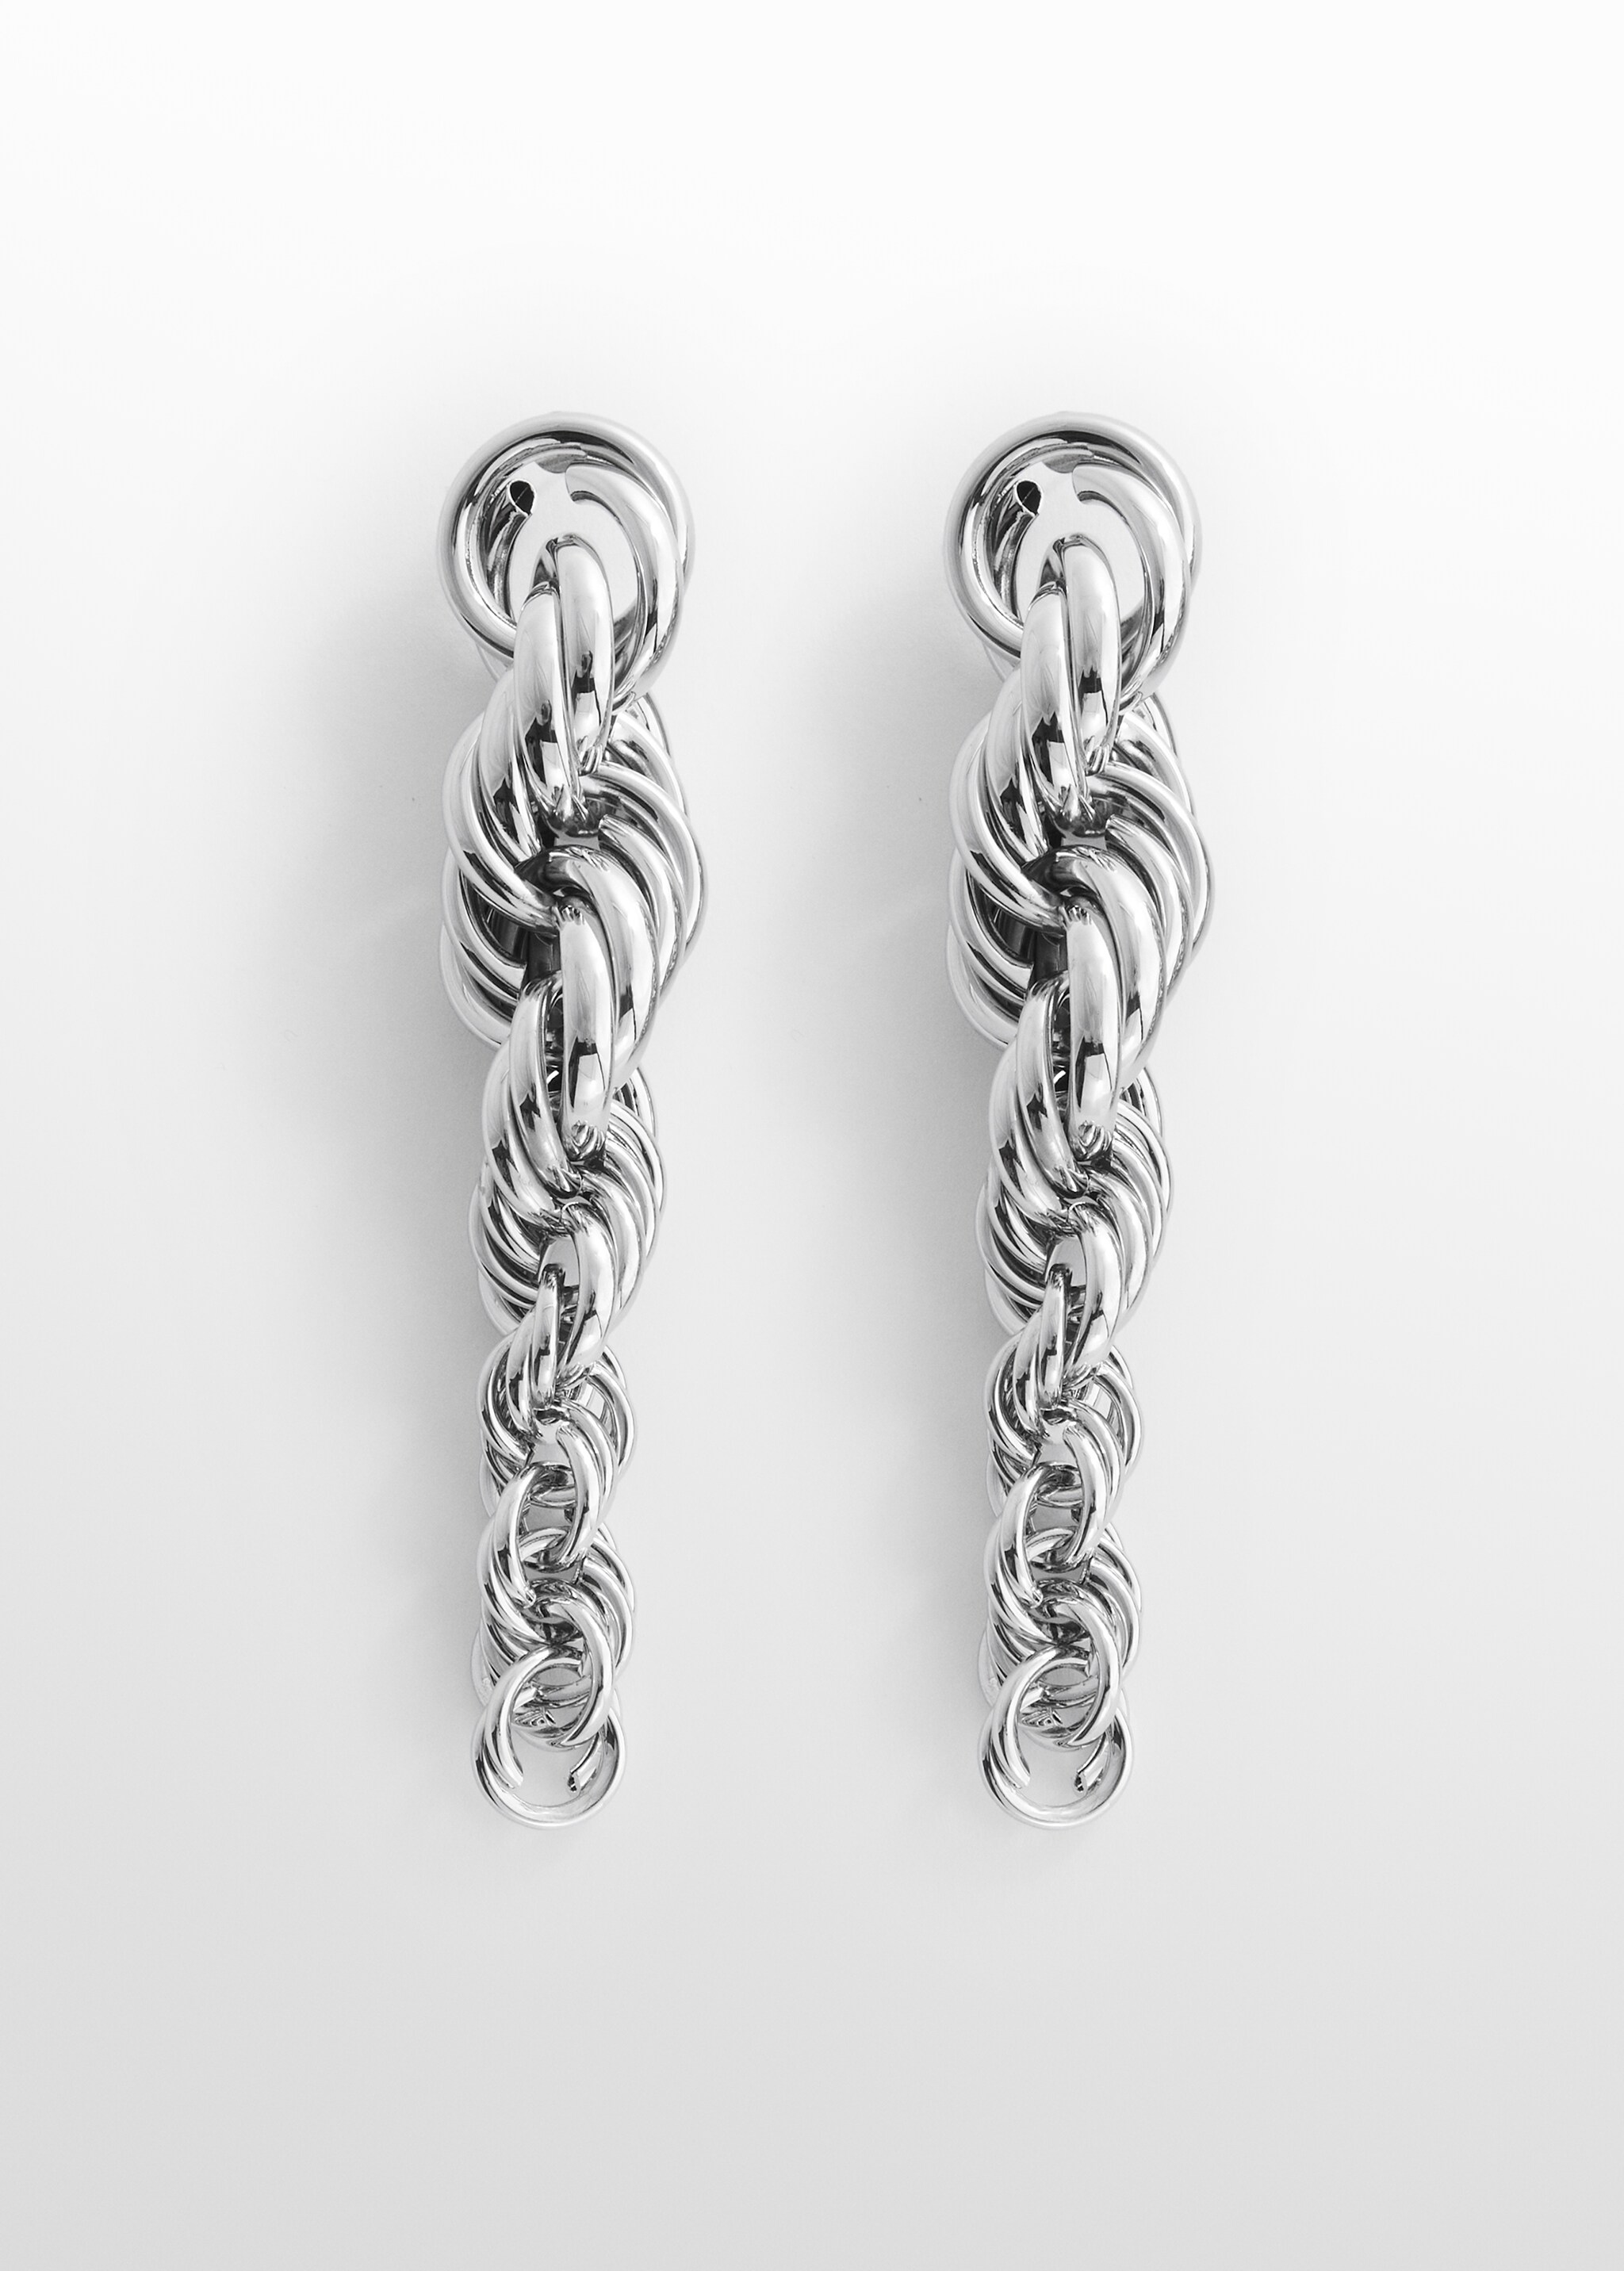 Braided long earrings - Article without model